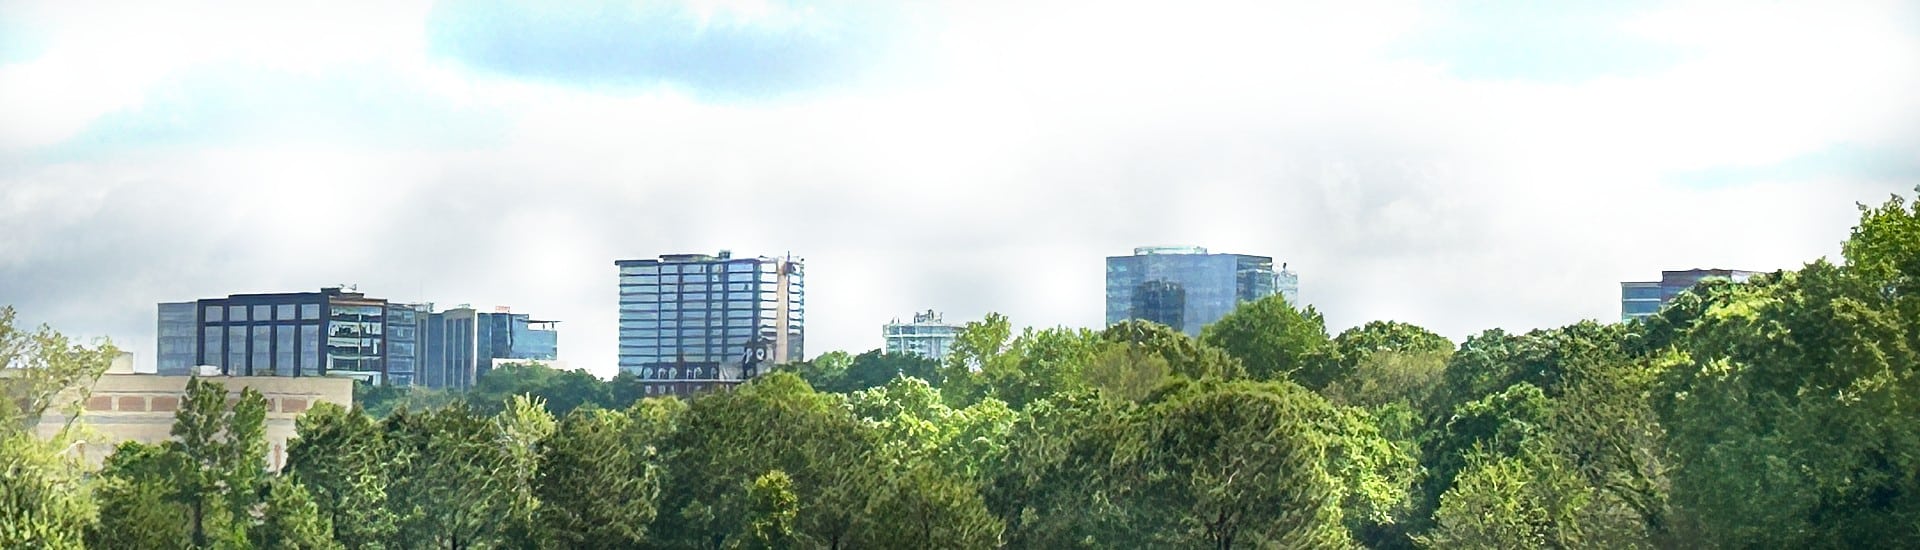 A large city skyline above a row of trees with blue skies above